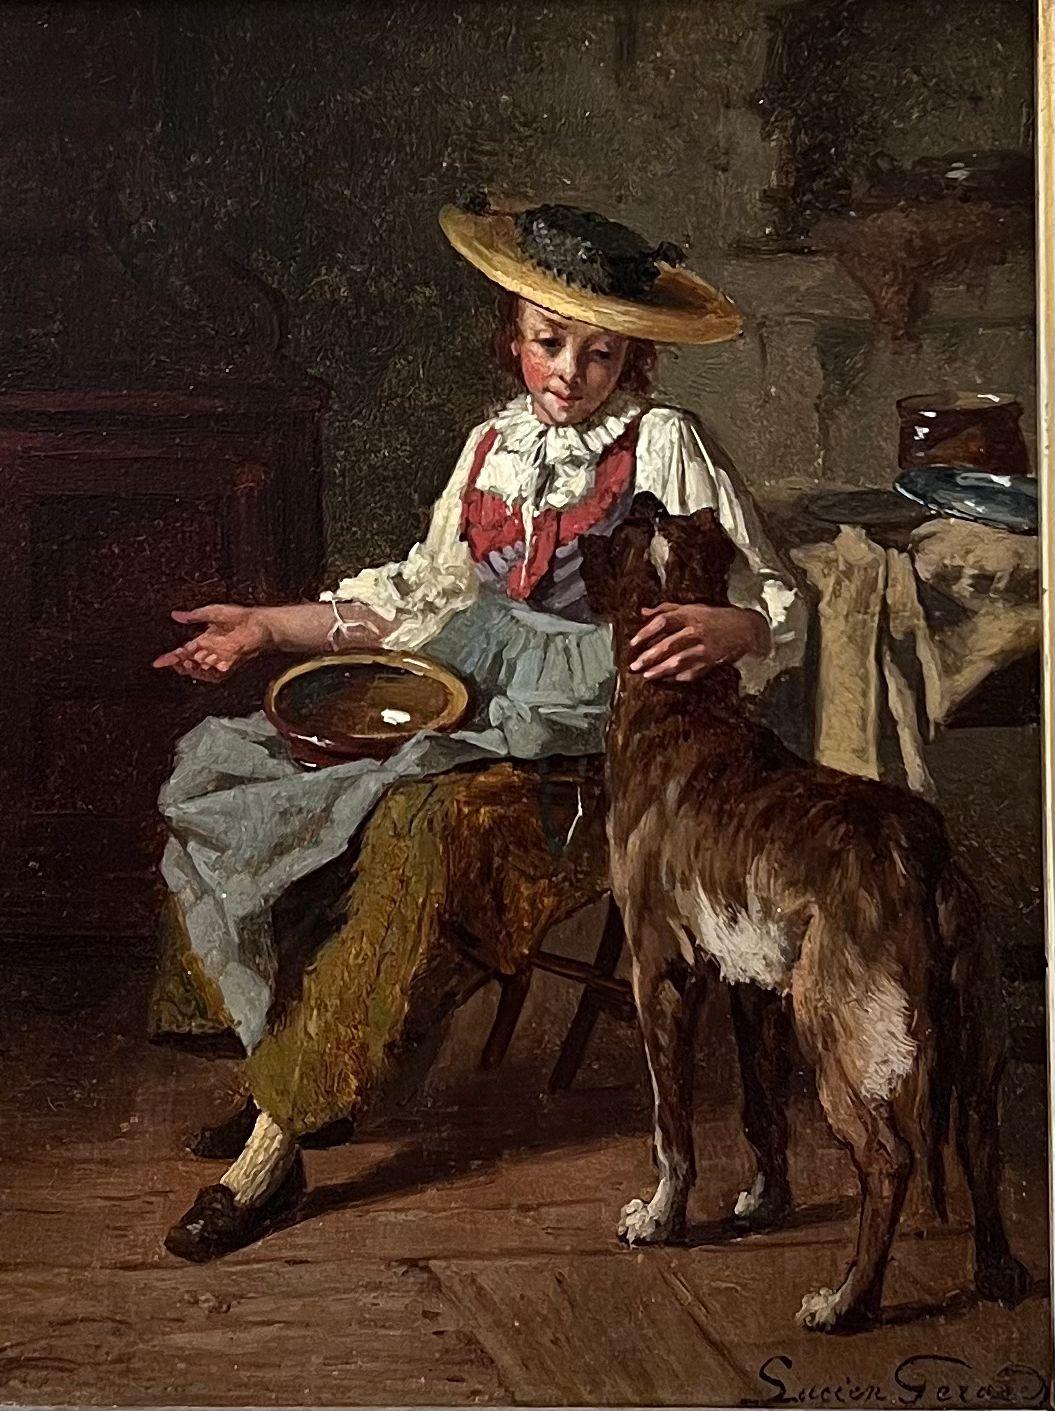 The Favourite Pet
by Lucien Gerard (French 1852-1935)
signed lower right corner
oil on wood panel, framed
panel: 8.75 x 6.75 inches
plus the substantial antique gilt frame
provenance: private collection, England
condition: very good and sound